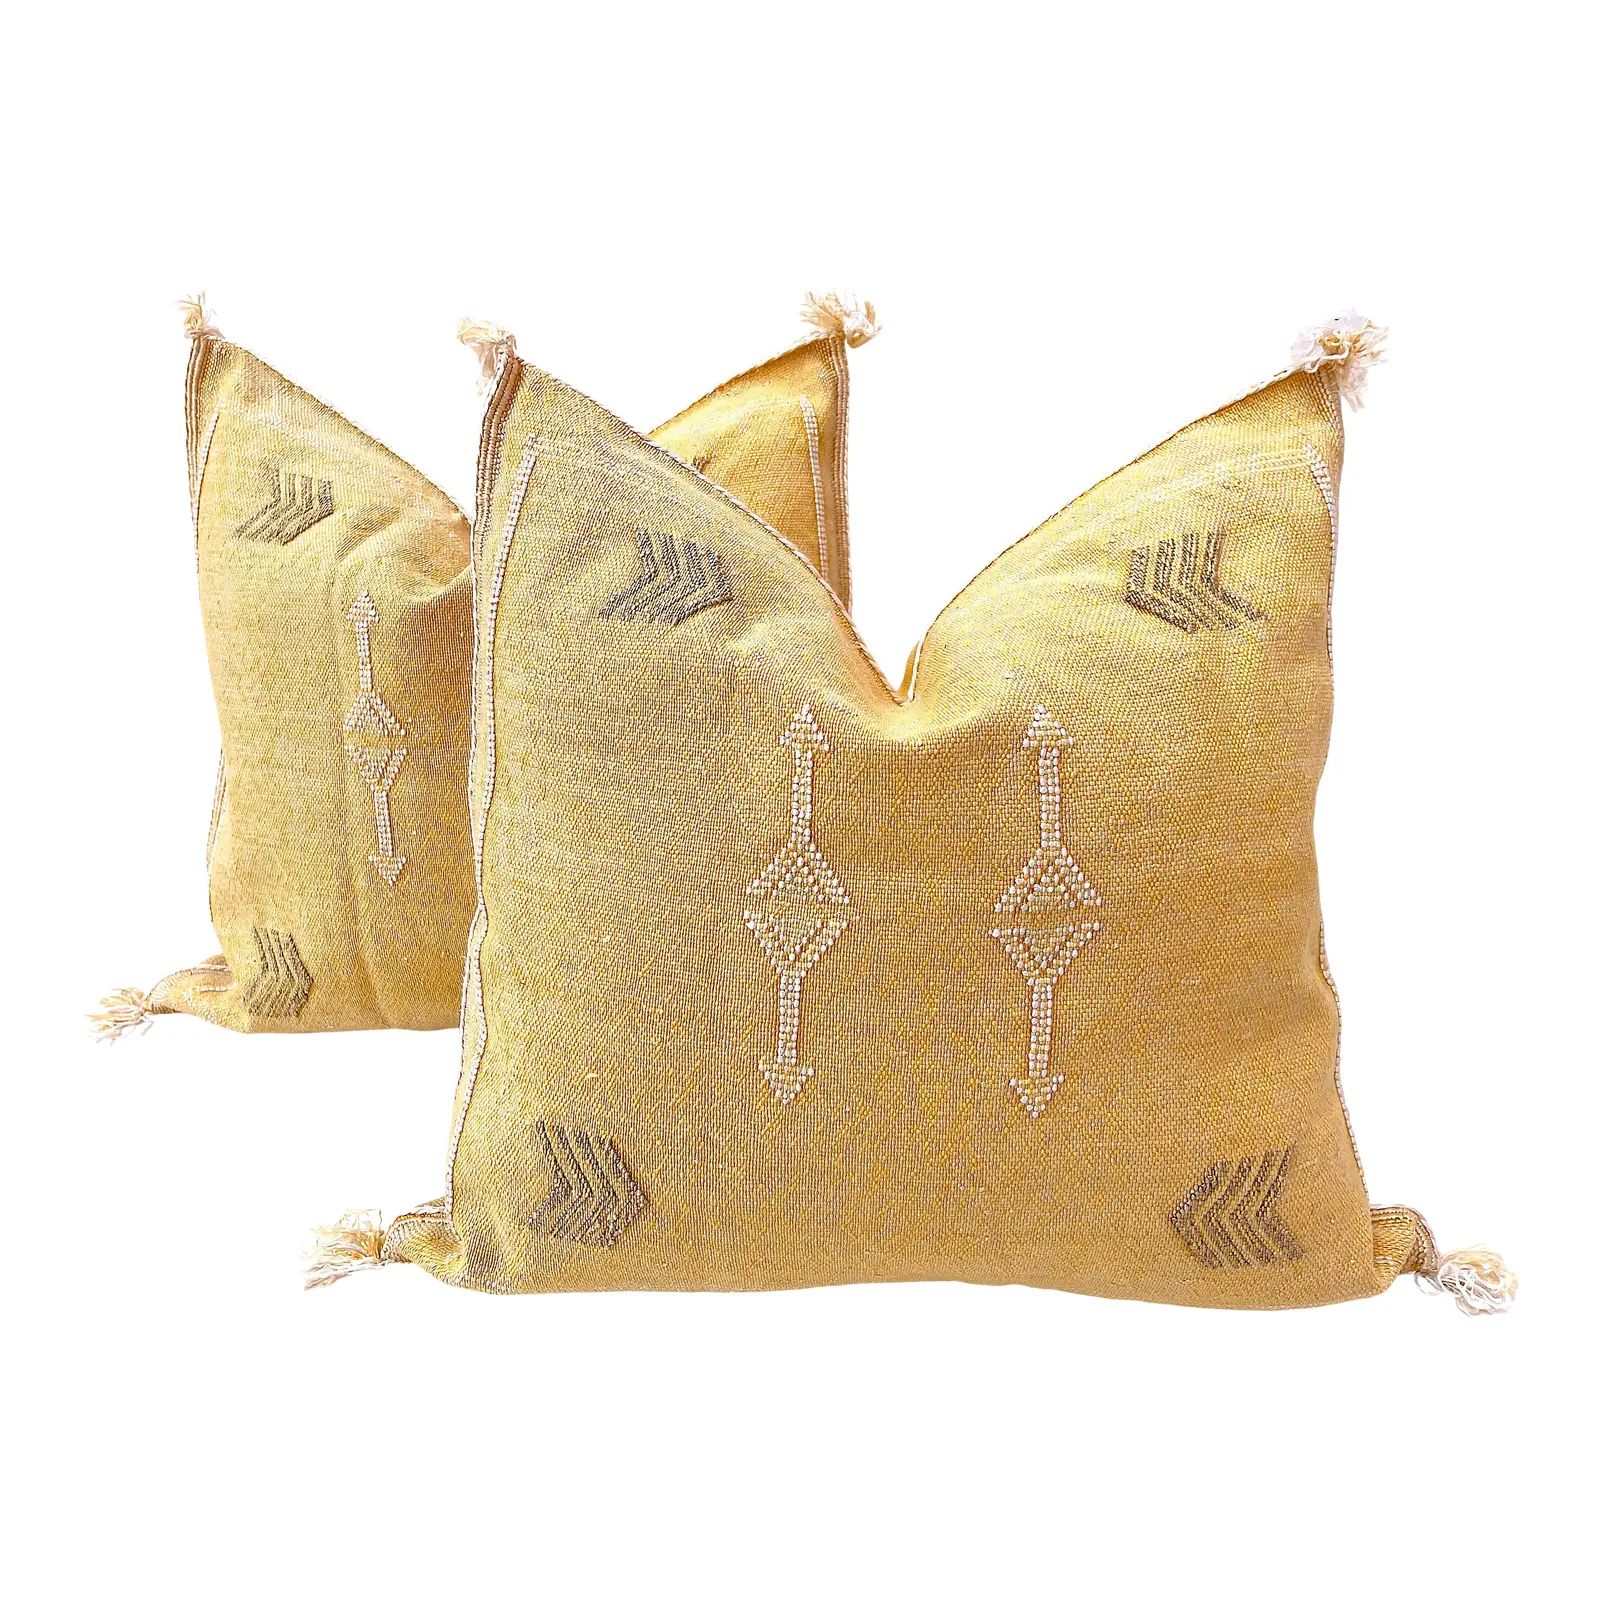 Moroccan Yellow Pillow Covers - a Pair | Chairish